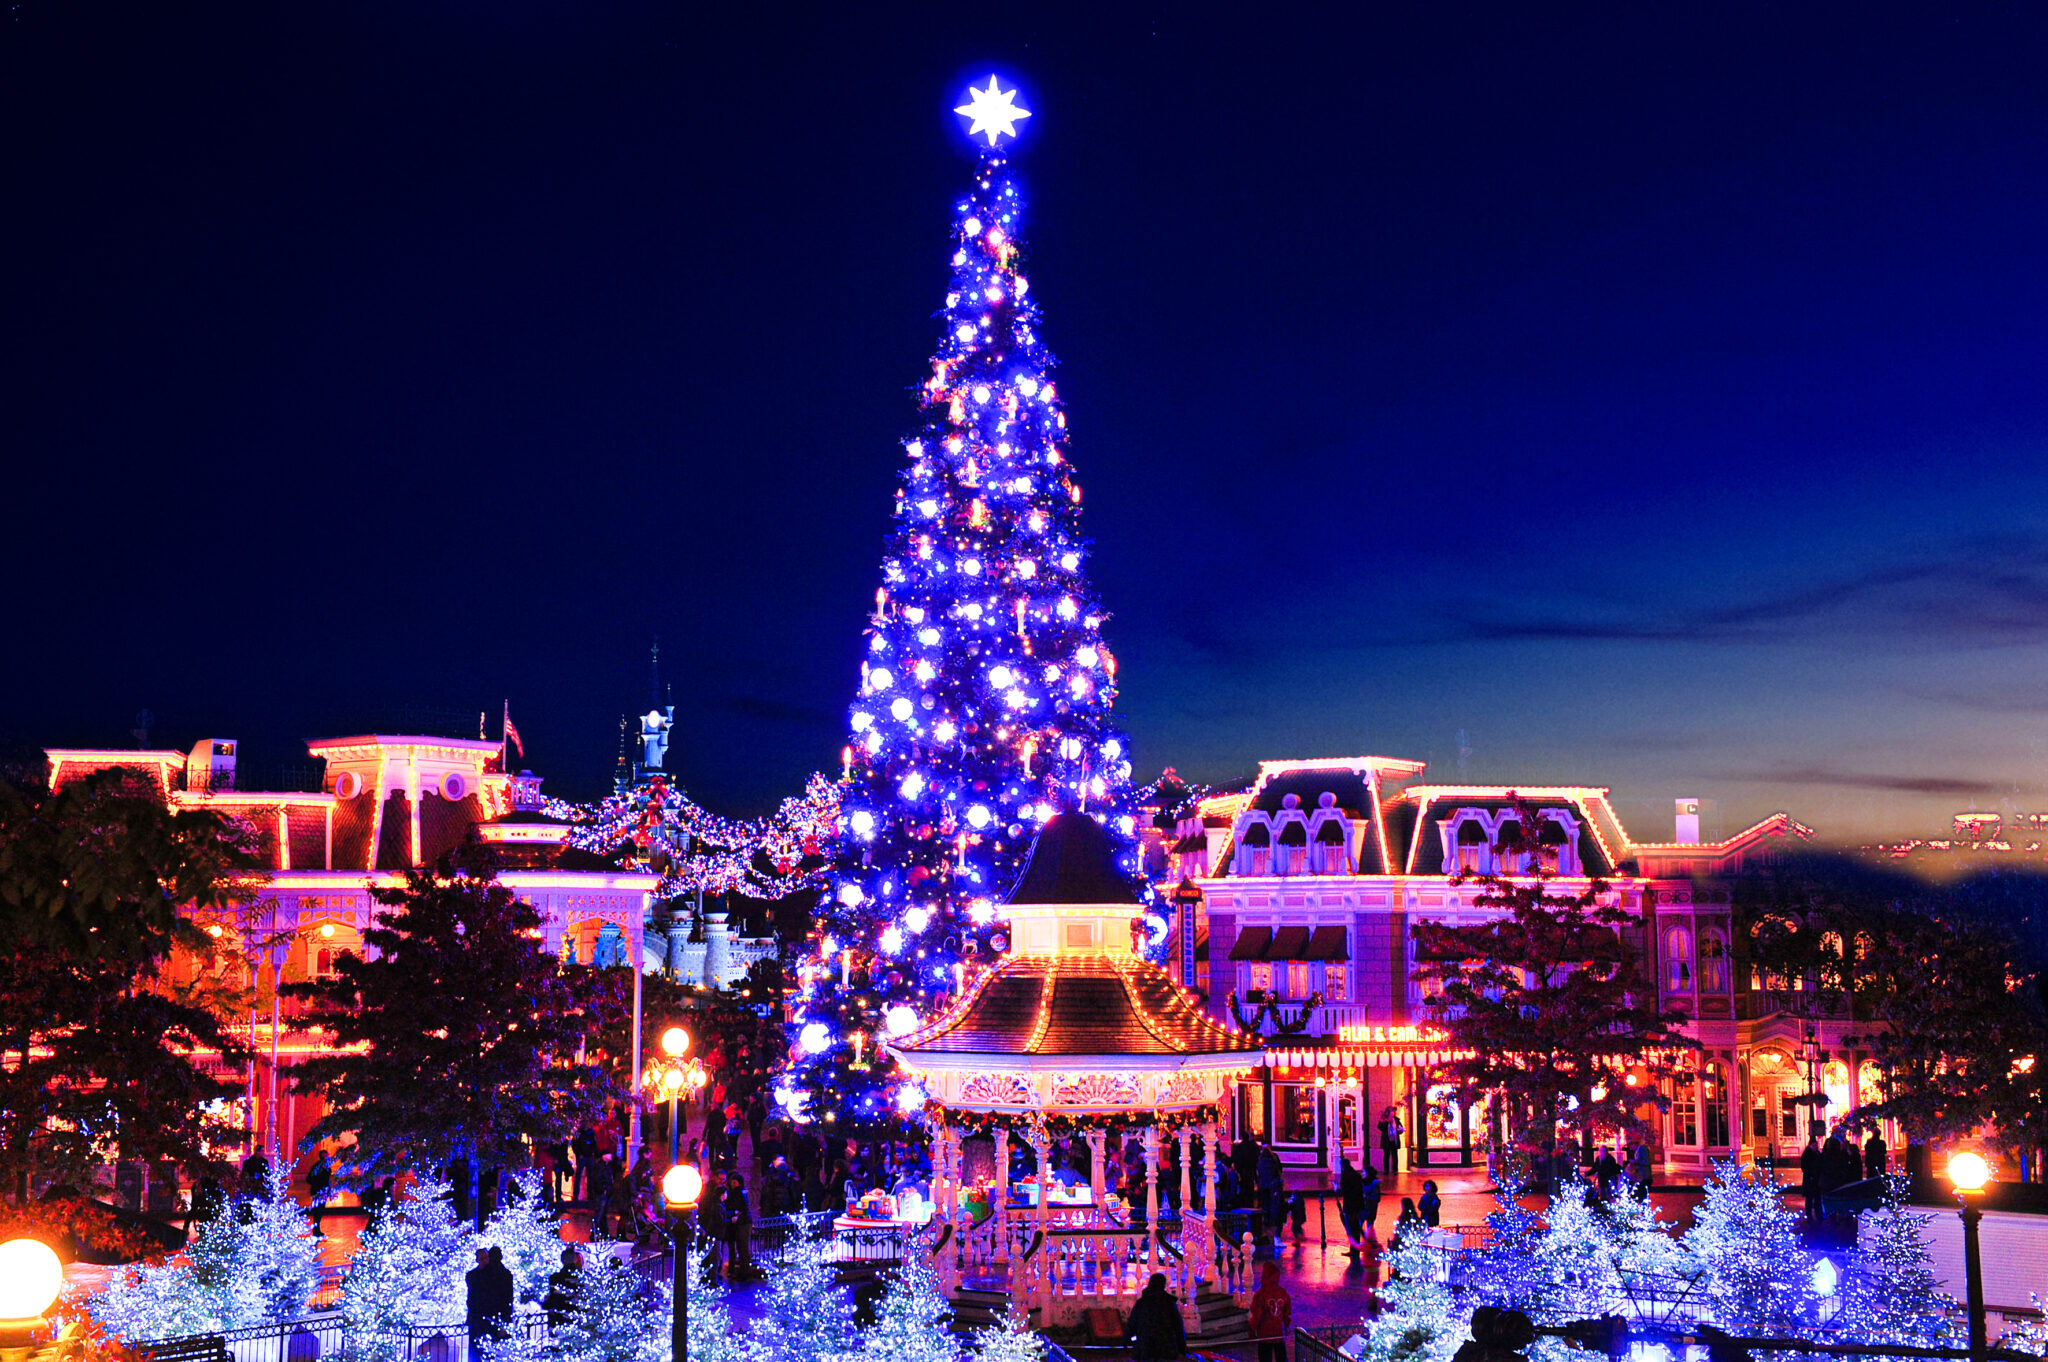 The Disney Enchanted Christmas will take place from November 11, 2023, to January 7, 2024.